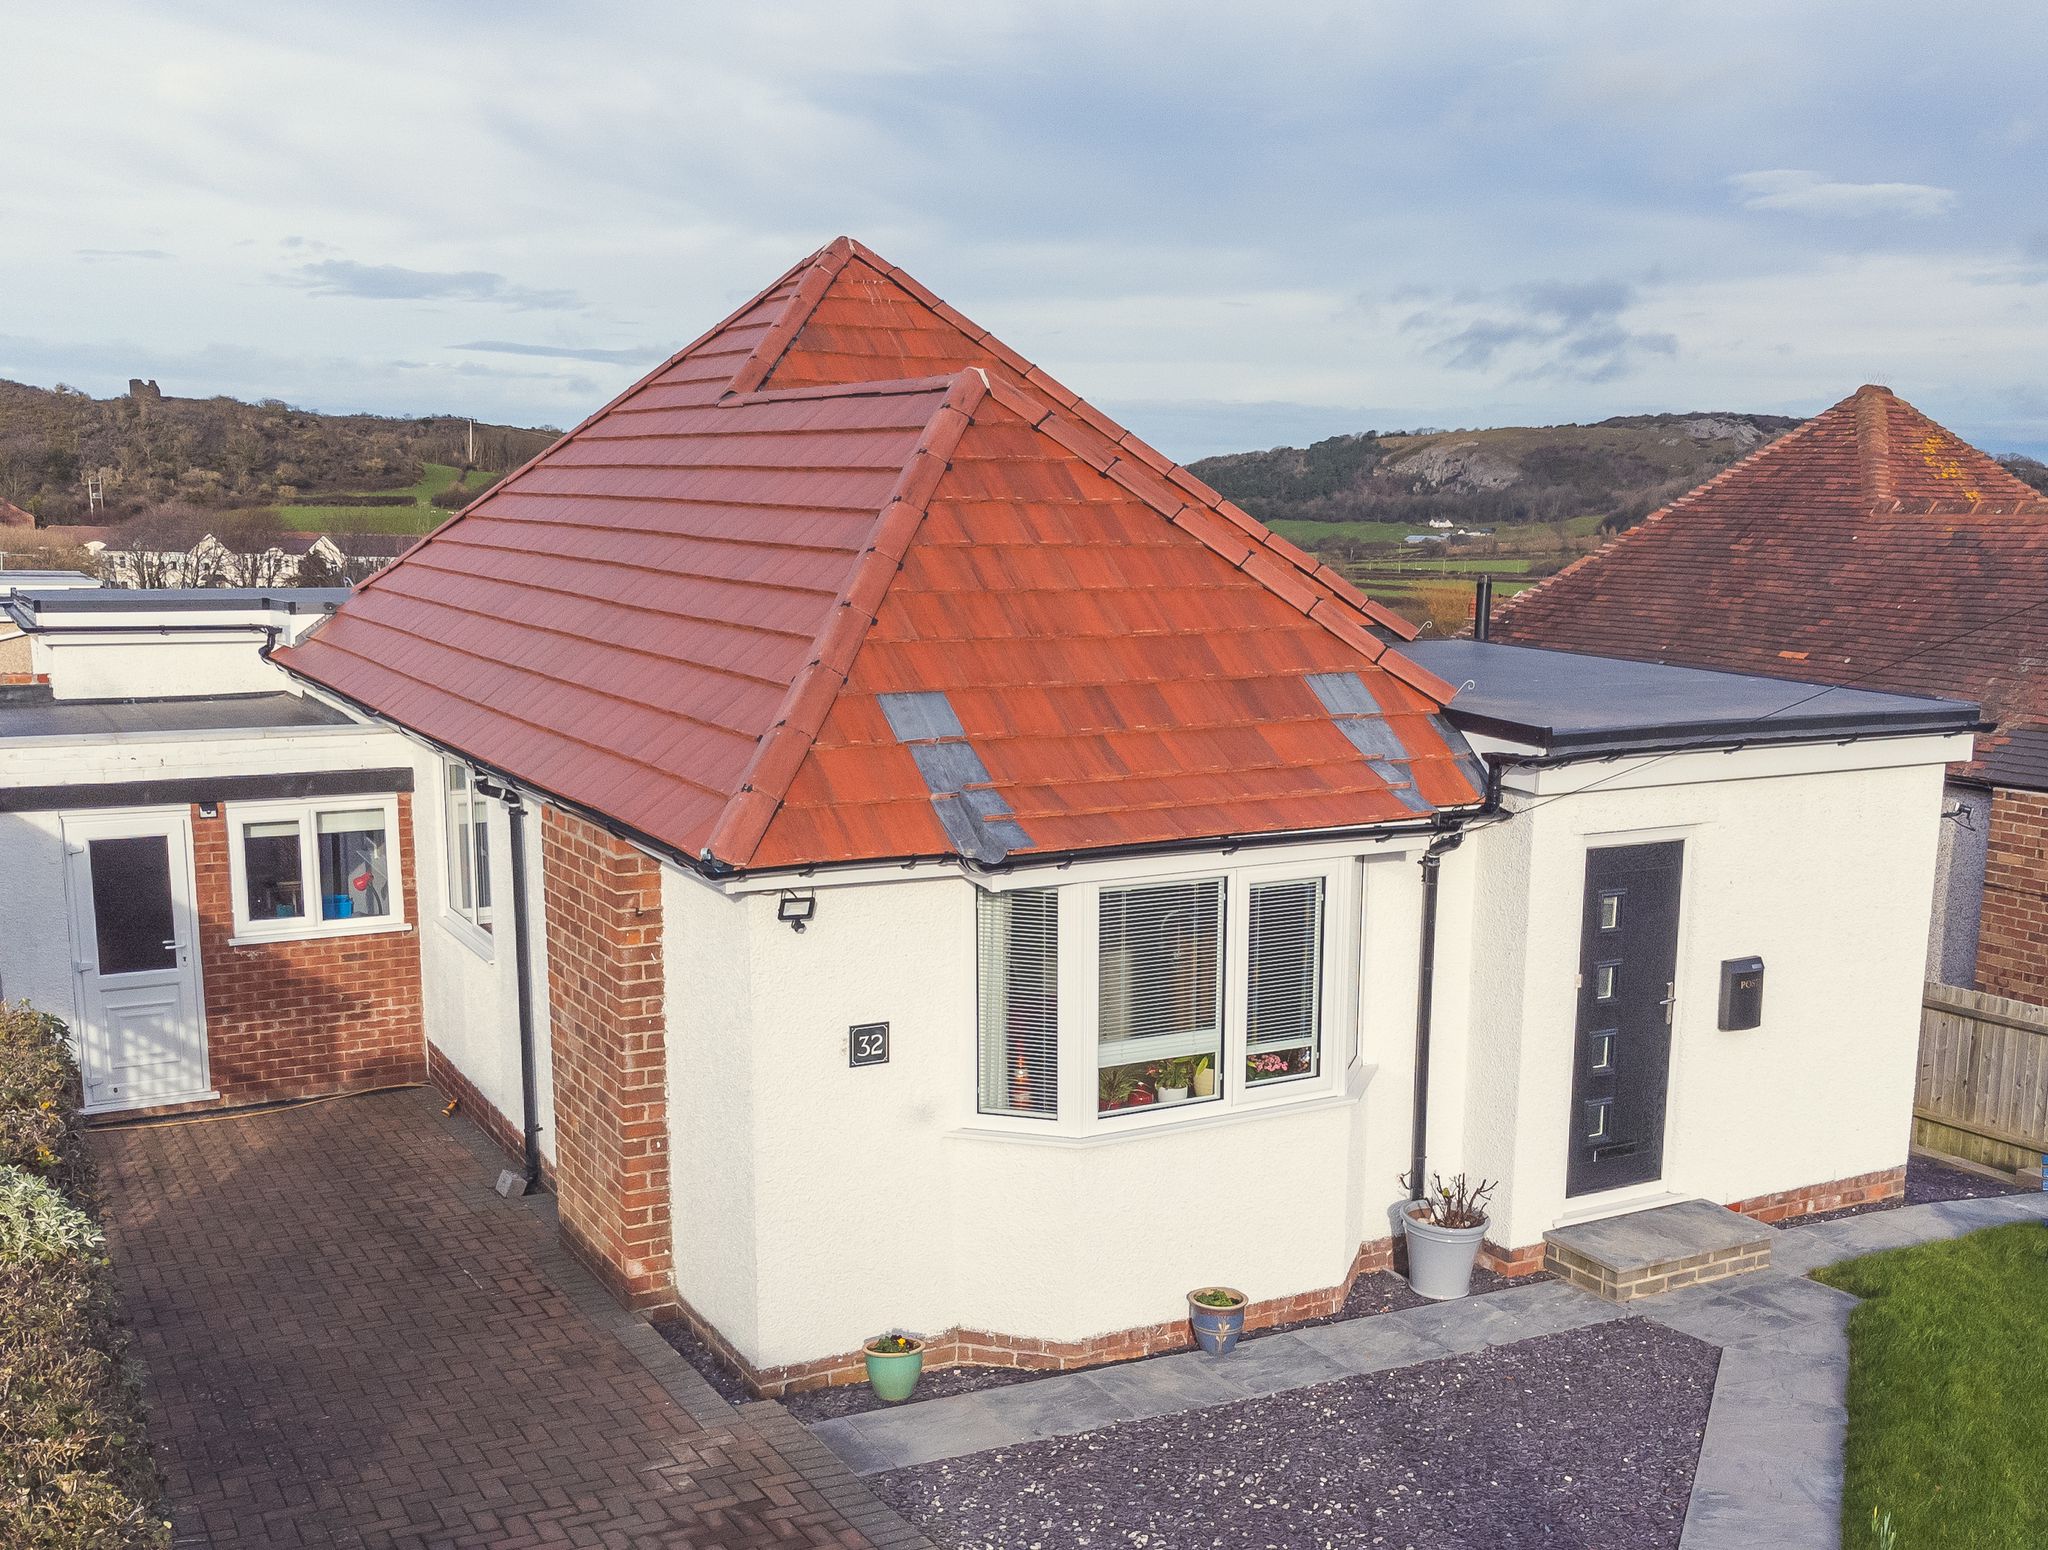 Tile Roof Contractors Rhyd-y-foel, LL22 - DD Roofing